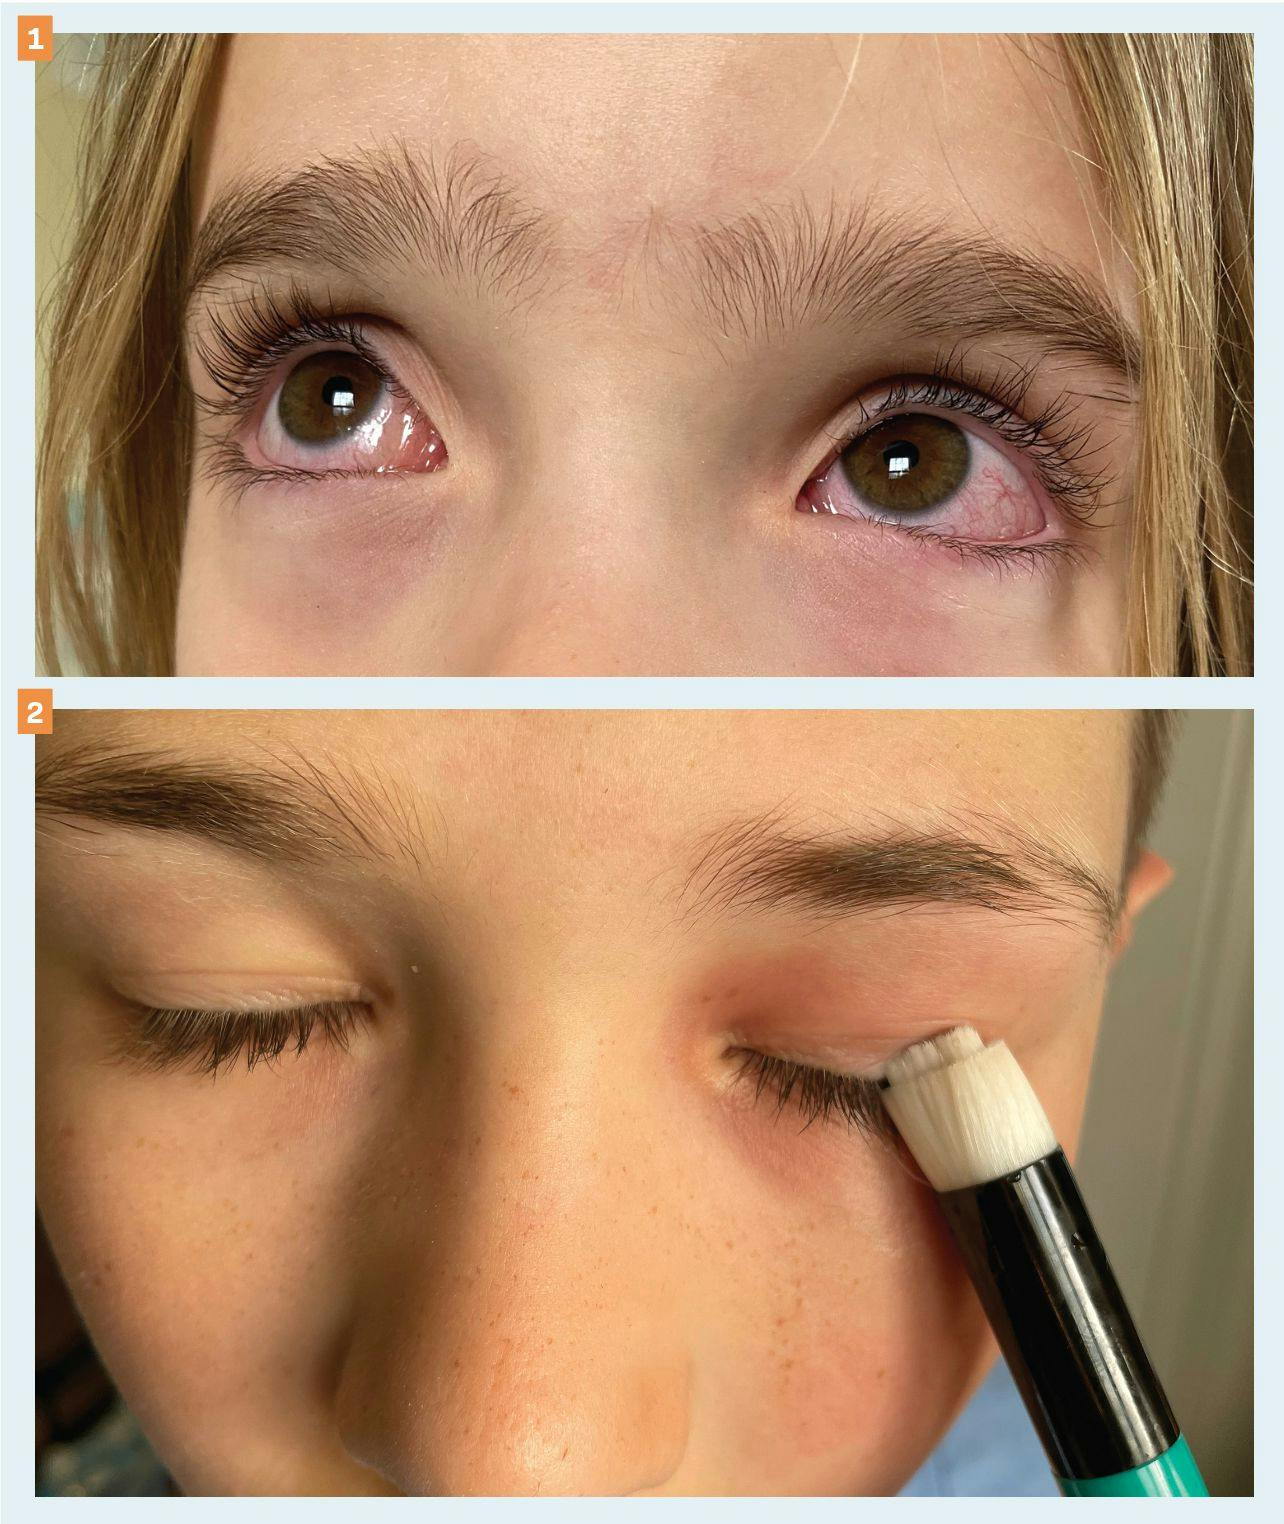 Figure 1. Bilateral conjunctival injection and chemosis in a child. (Image courtesy of Dora Mathe, MS, OD, FAAO, Vanderbilt Eye Institute) Figure 2. Child cleansing lids and lashes with eyelid margin cleansing brush. This can help remove allergens from the surface. (Image courtesy of Shawna L. Vanderhoof, OD, FAAO)